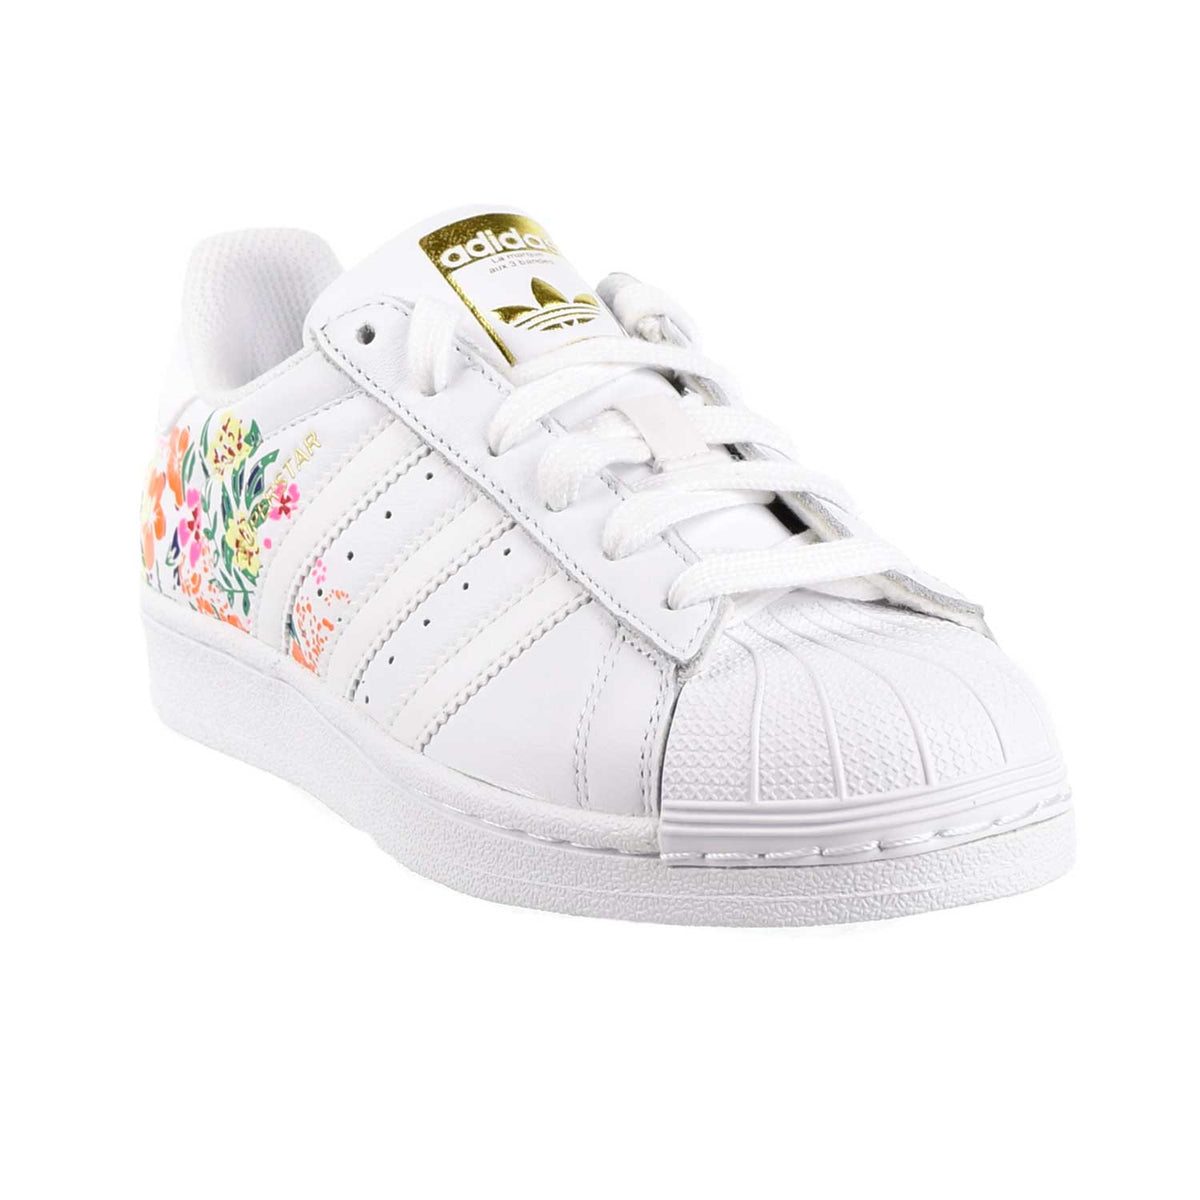 Adidas Superstar Womens Shoes Floral Footwear White/Gold Metallic – Sports Plaza